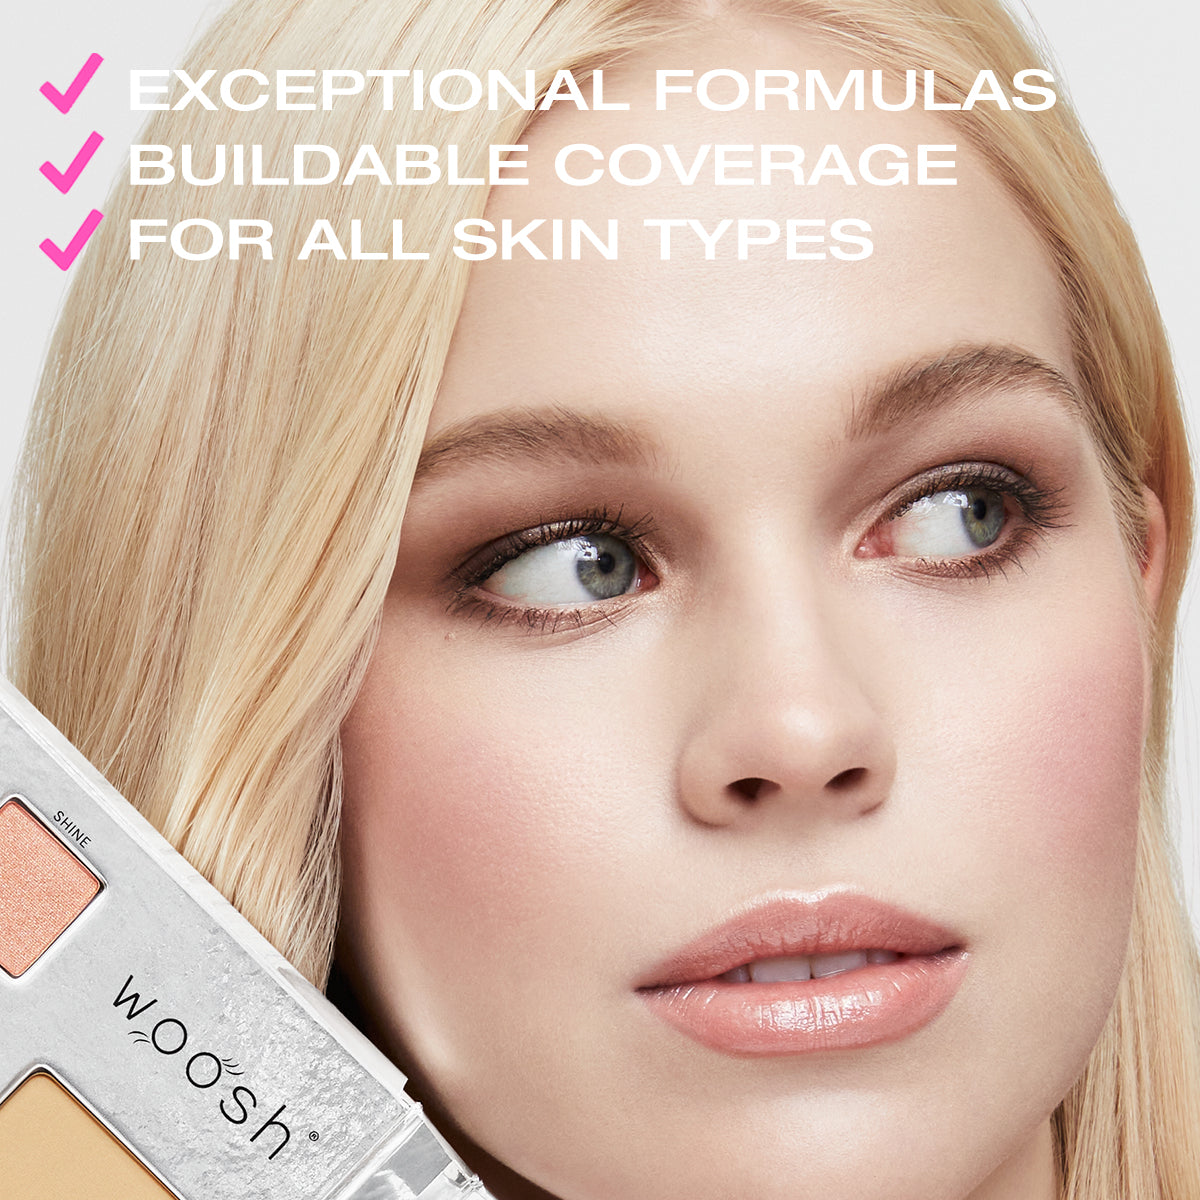 Exceptional formulas, buildable coverage, for all skin types 